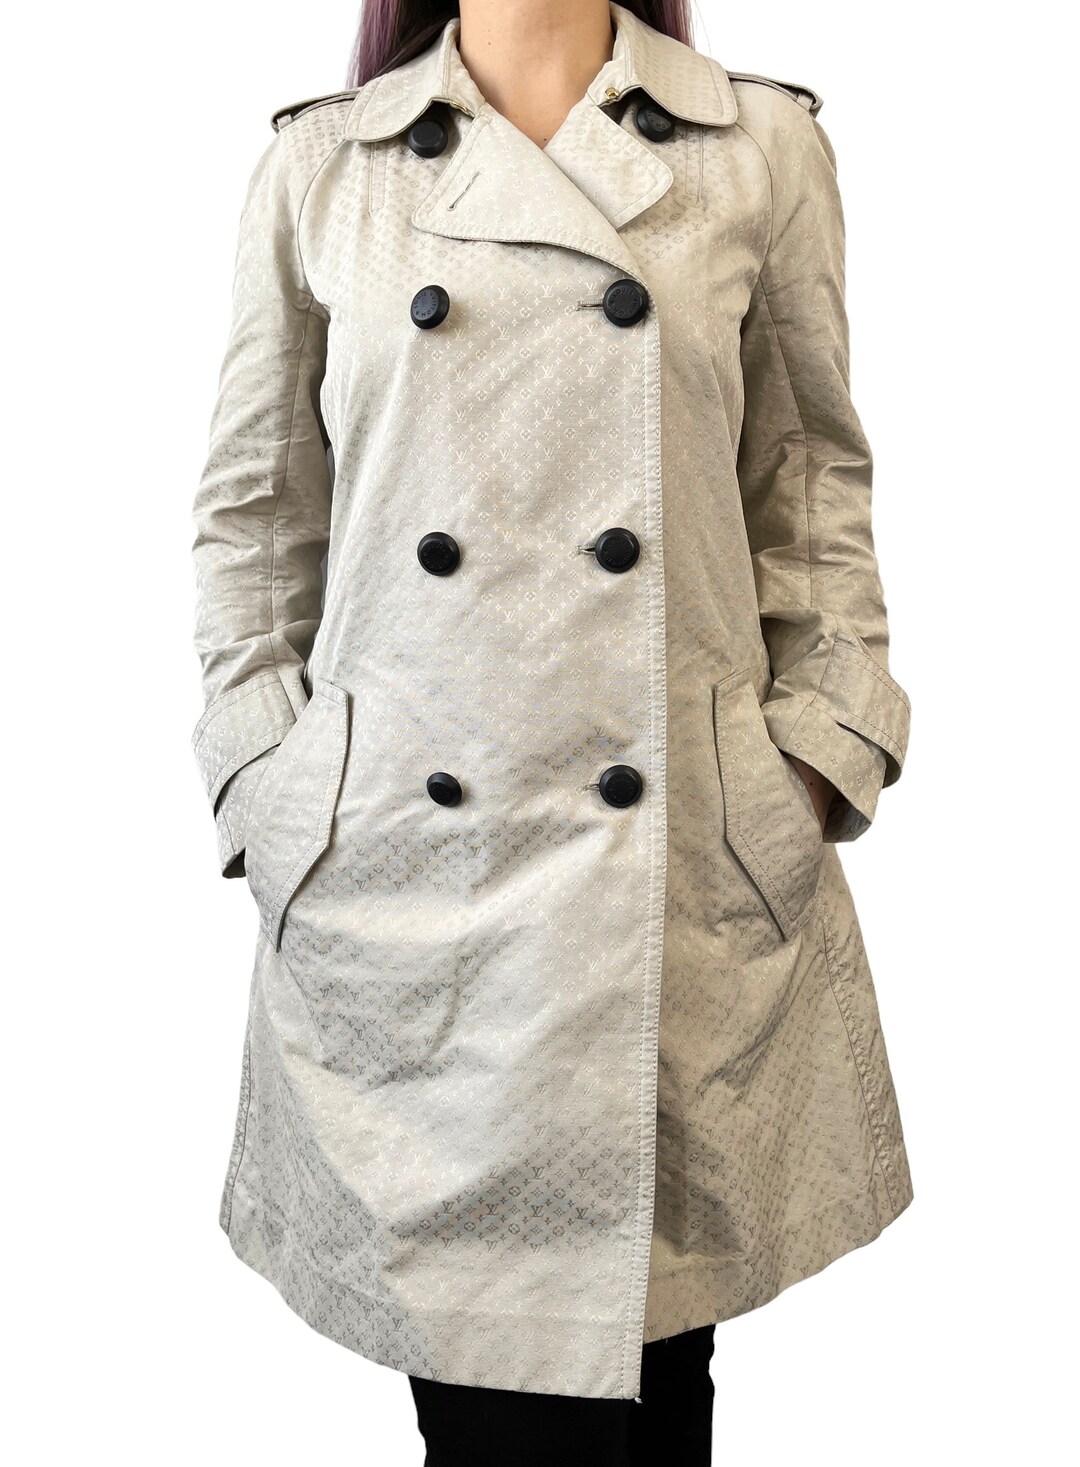 LOUIS VUITTON Cotton Trench Coat 38 Authentic Women Used from Japan